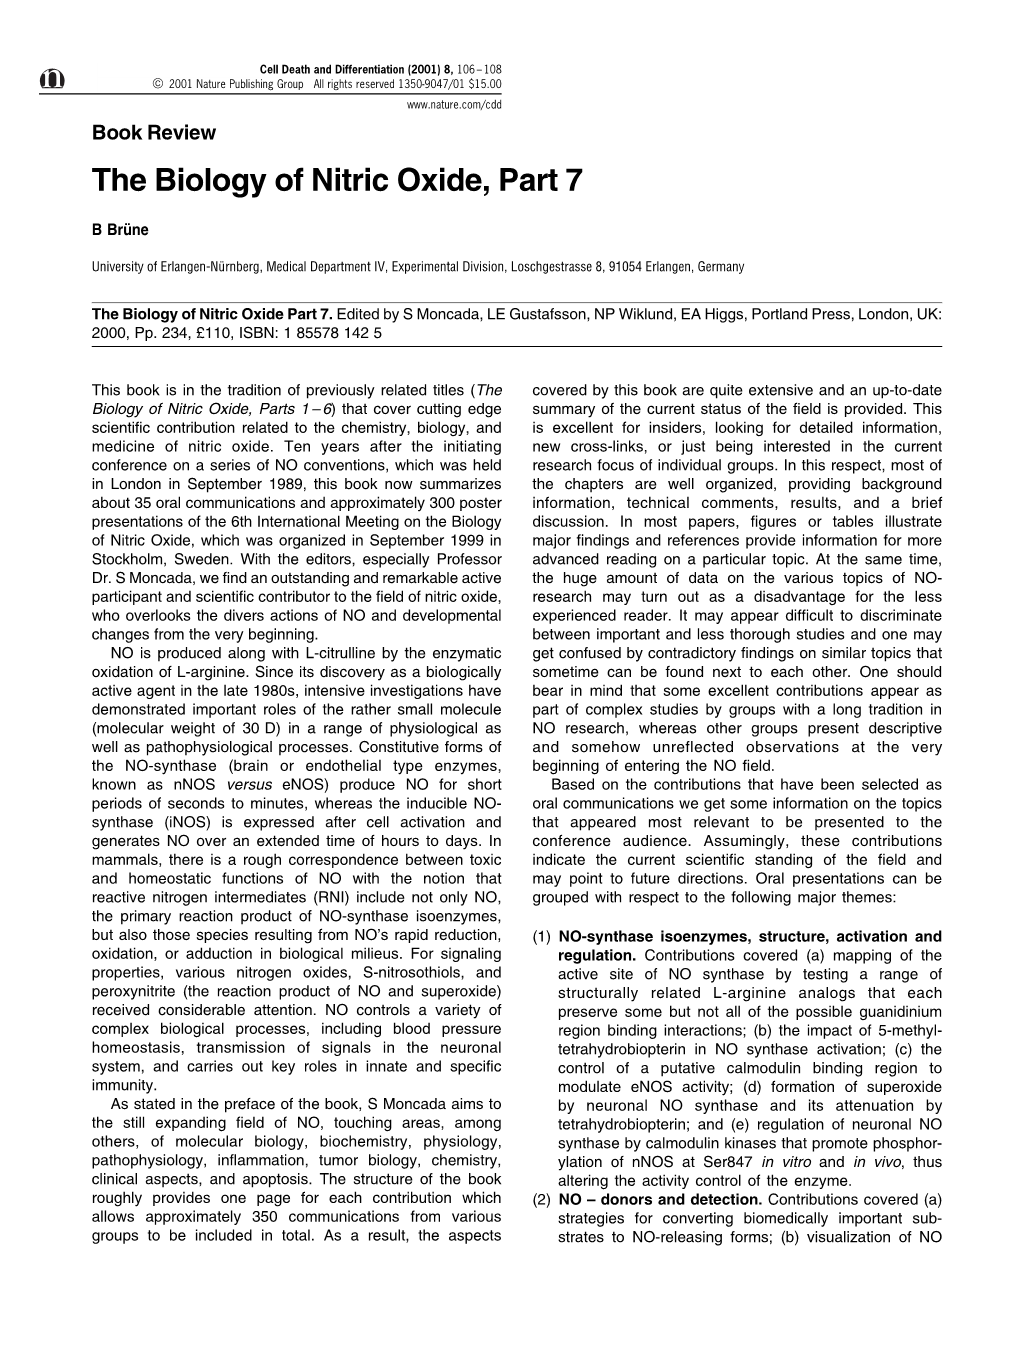 The Biology of Nitric Oxide, Part 7